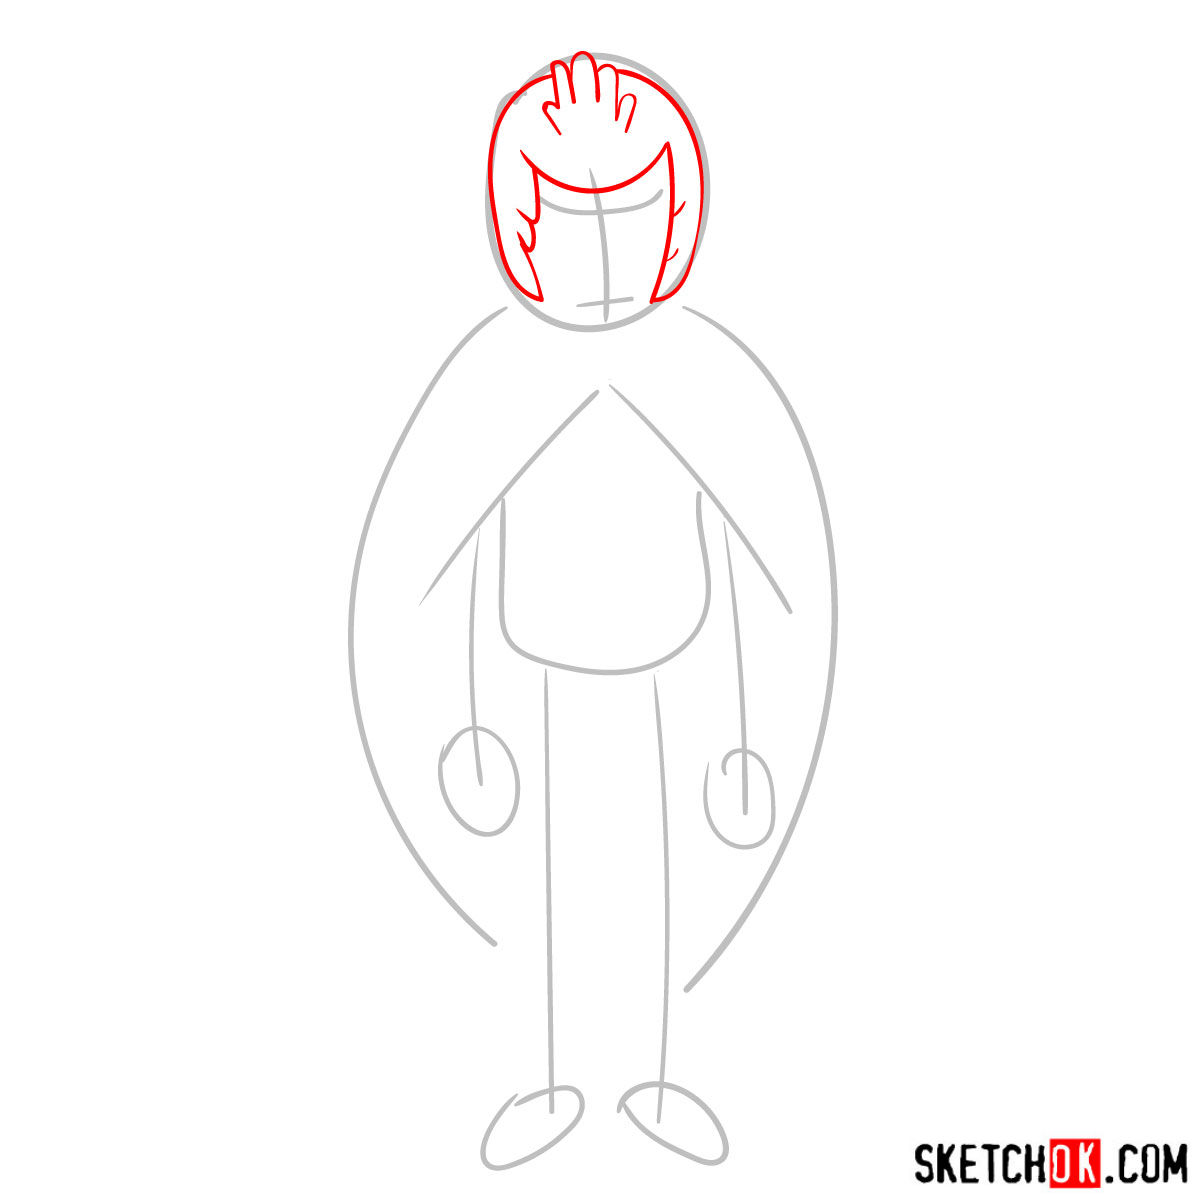 How to draw Birdperson from Rick and Morty series - step 02